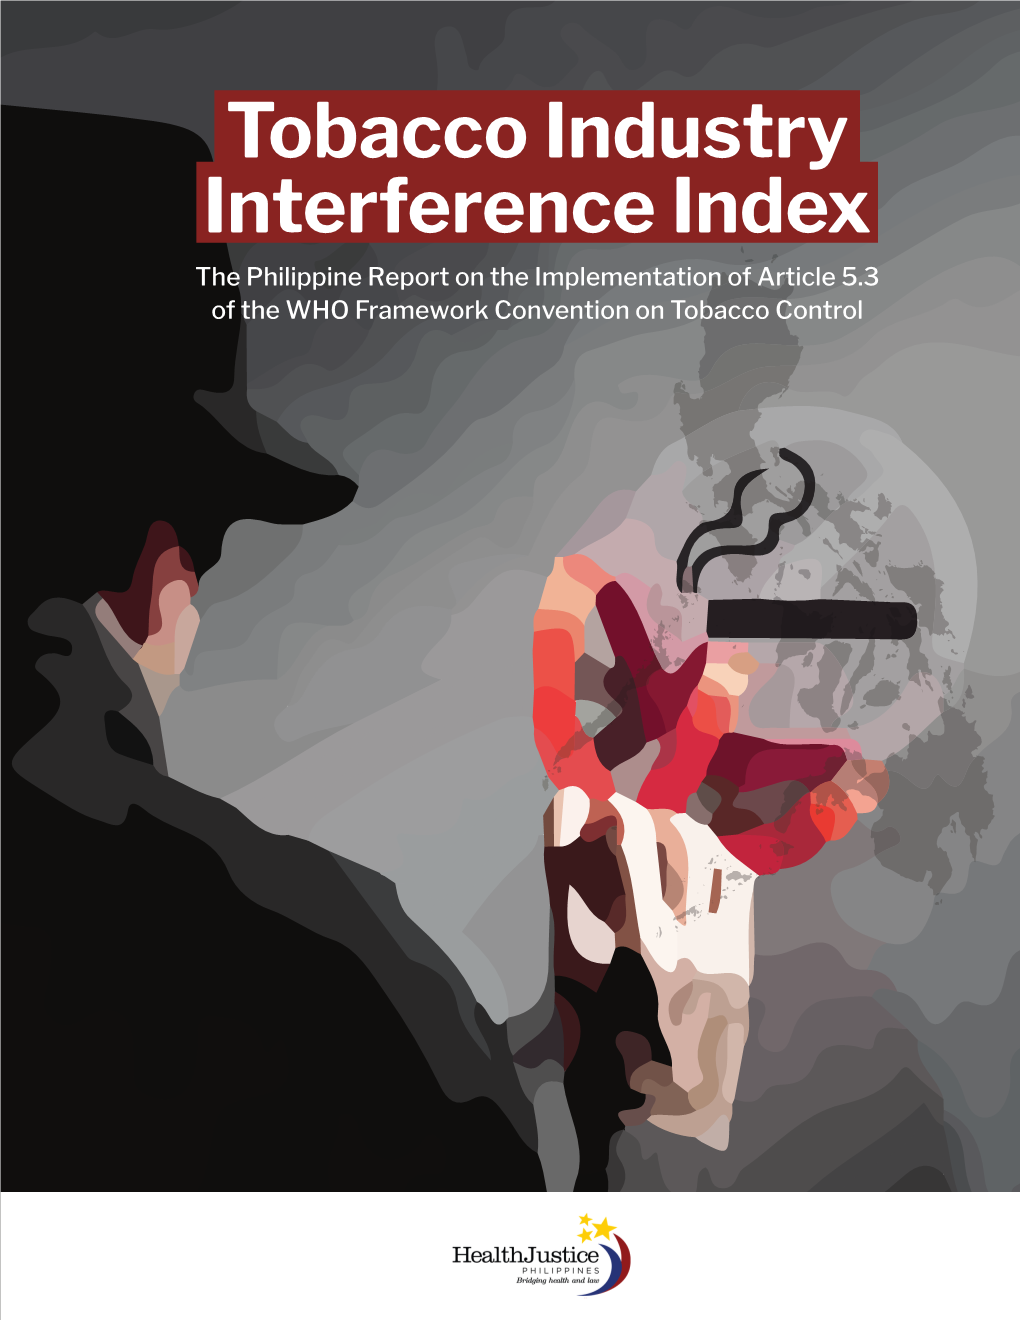 Tobacco Industry Interference Index the Philippine Report on the Implementation of Article 5.3 of the WHO Framework Convention on Tobacco Control